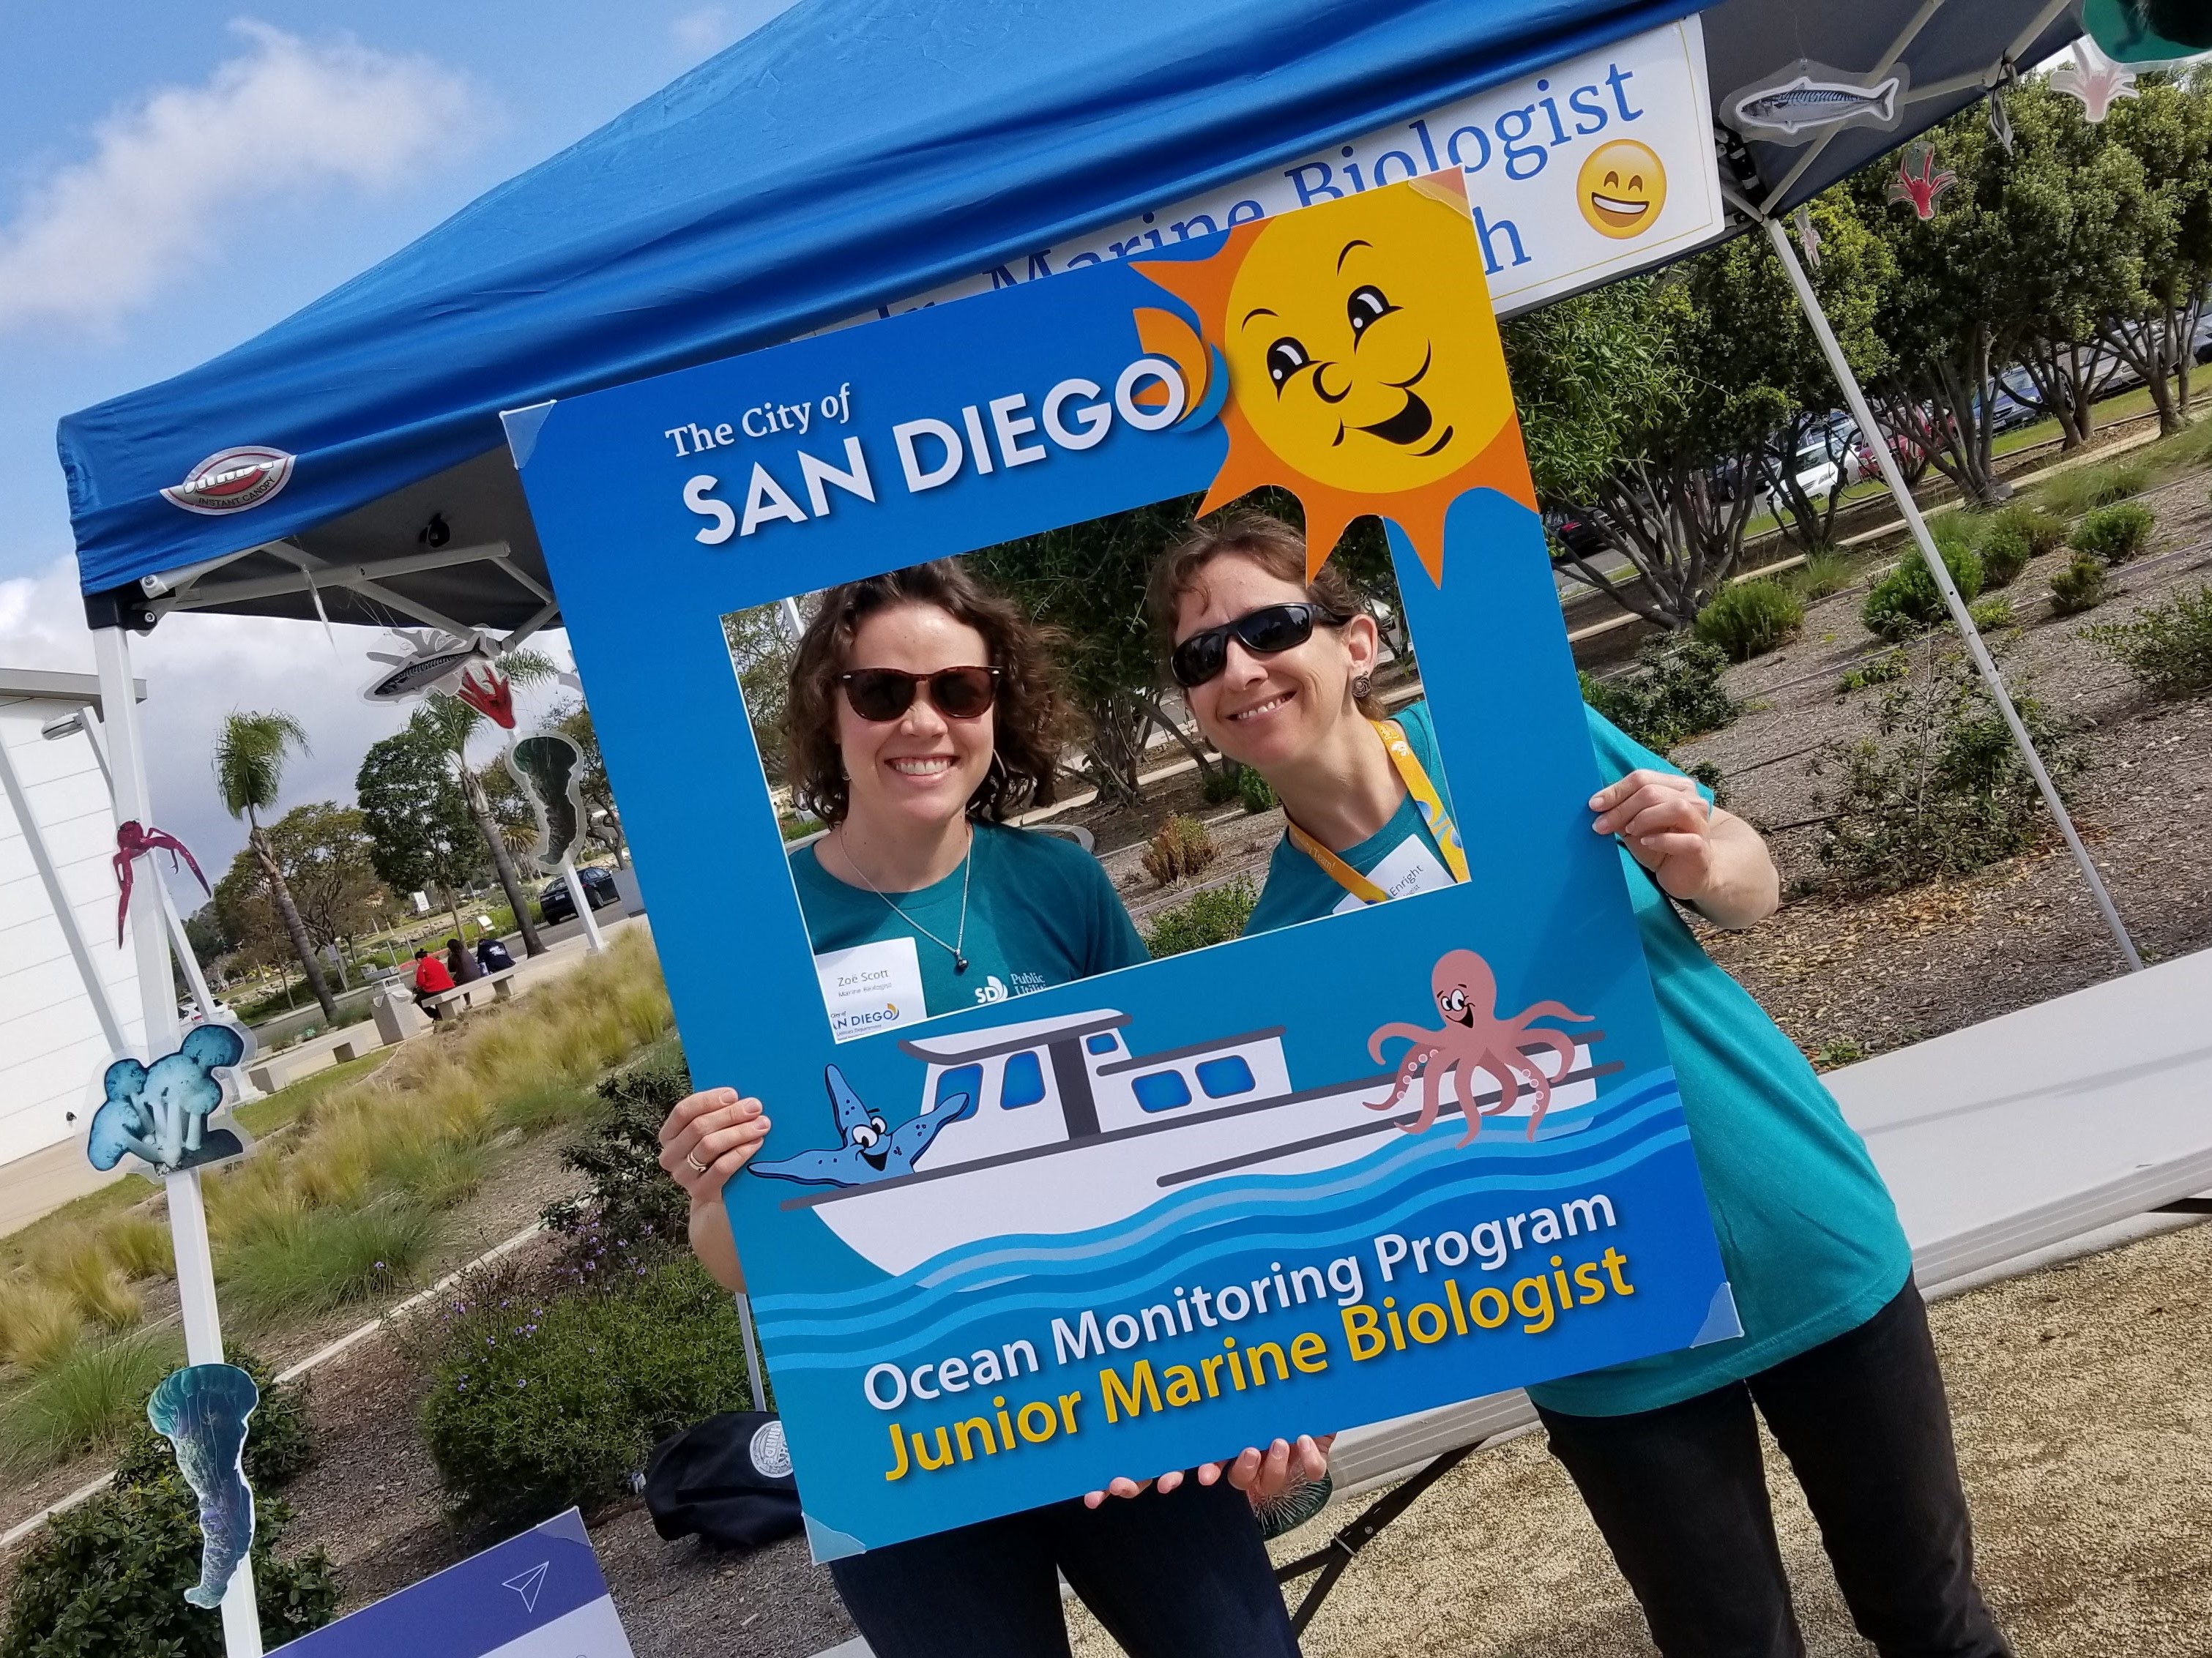 Two marine biologists pose with a social media frame at the Ocean Monitoring Program's Open House event.